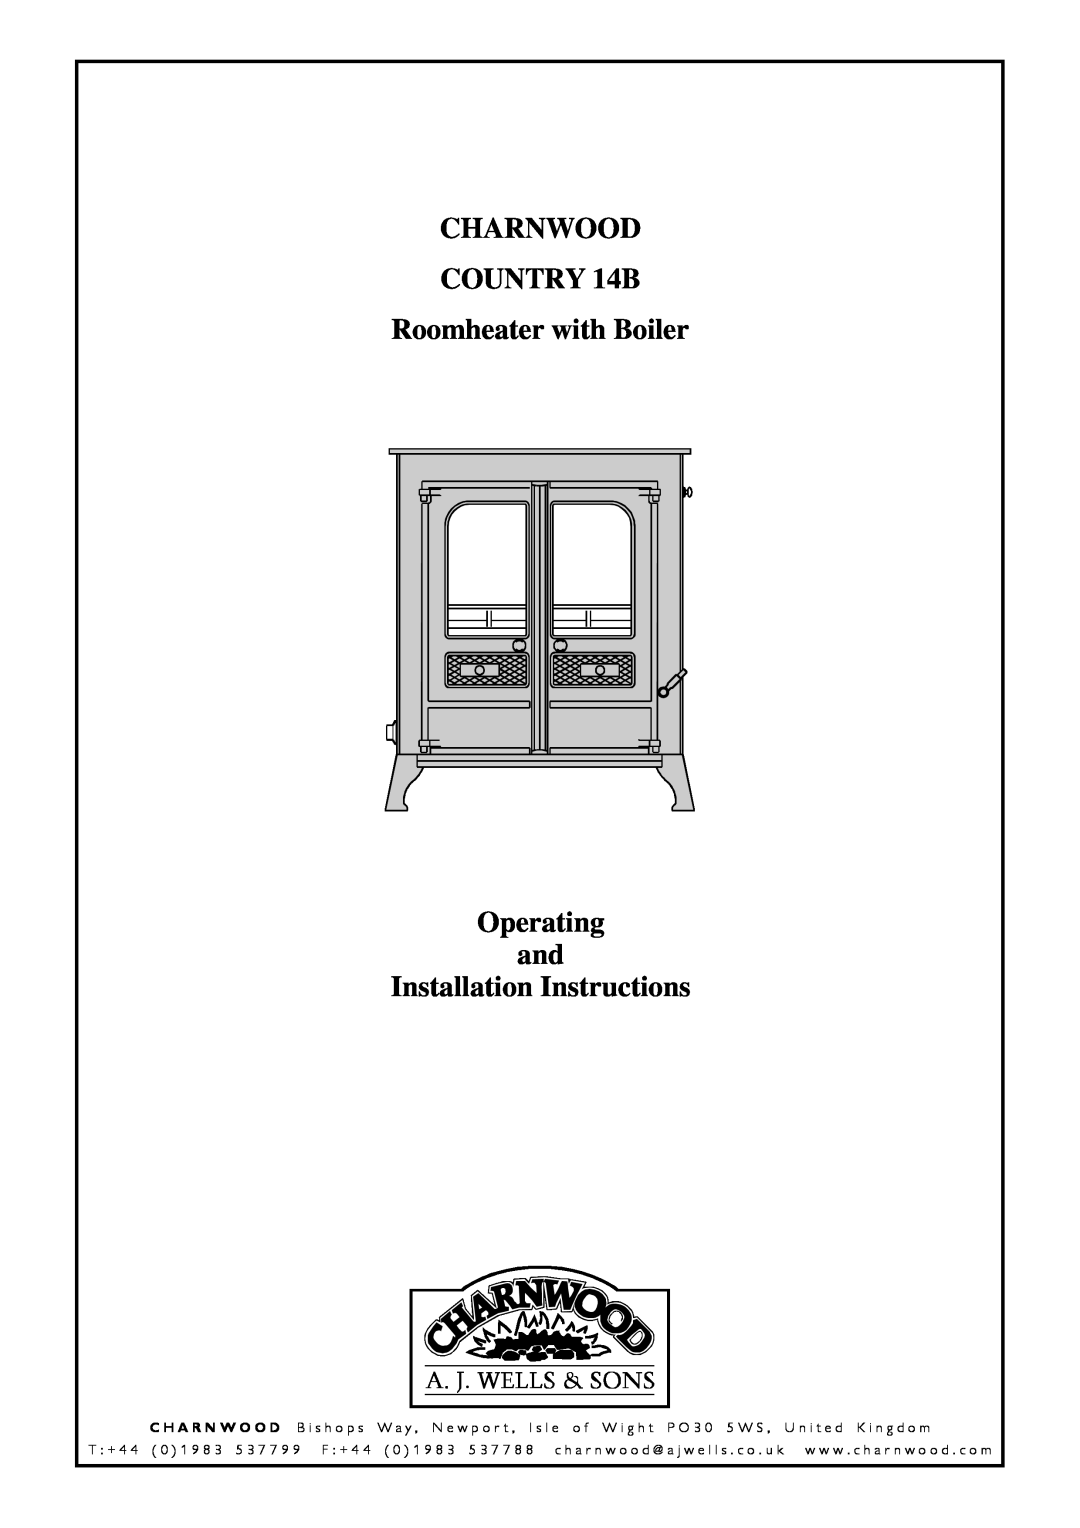 Charnwood Country 14B installation instructions CHARNWOOD COUNTRY 14B Roomheater with Boiler 